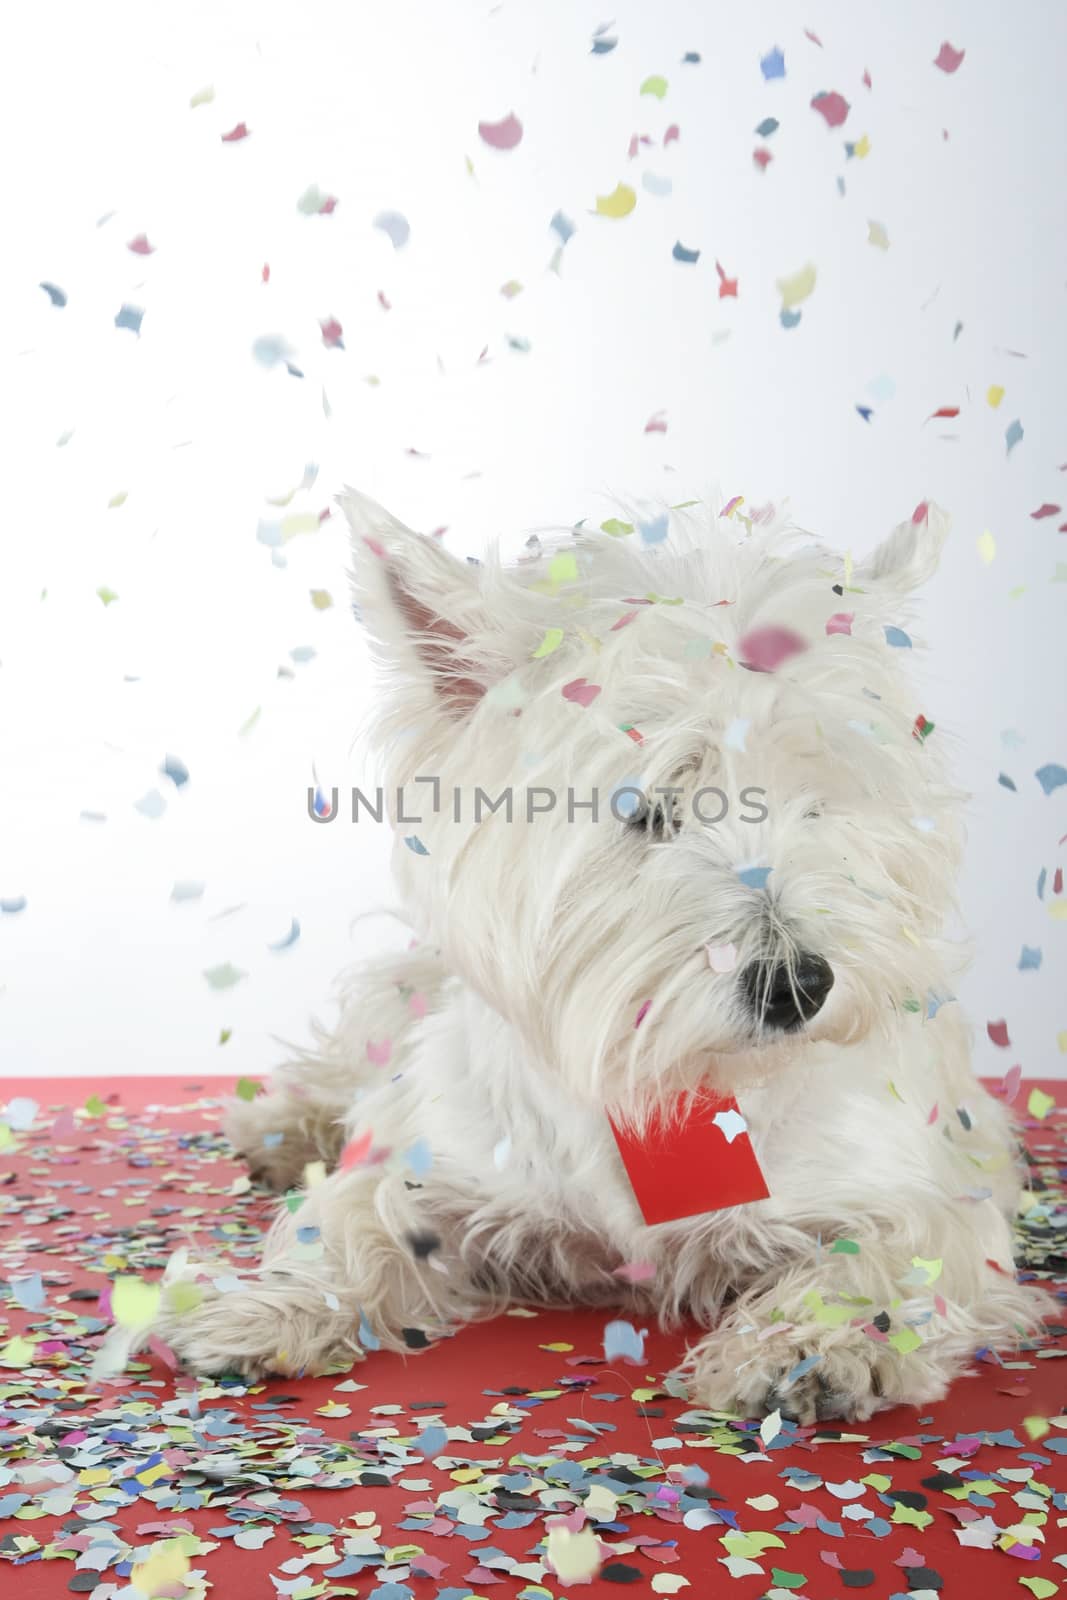 West highland white terrier with copy-space note.